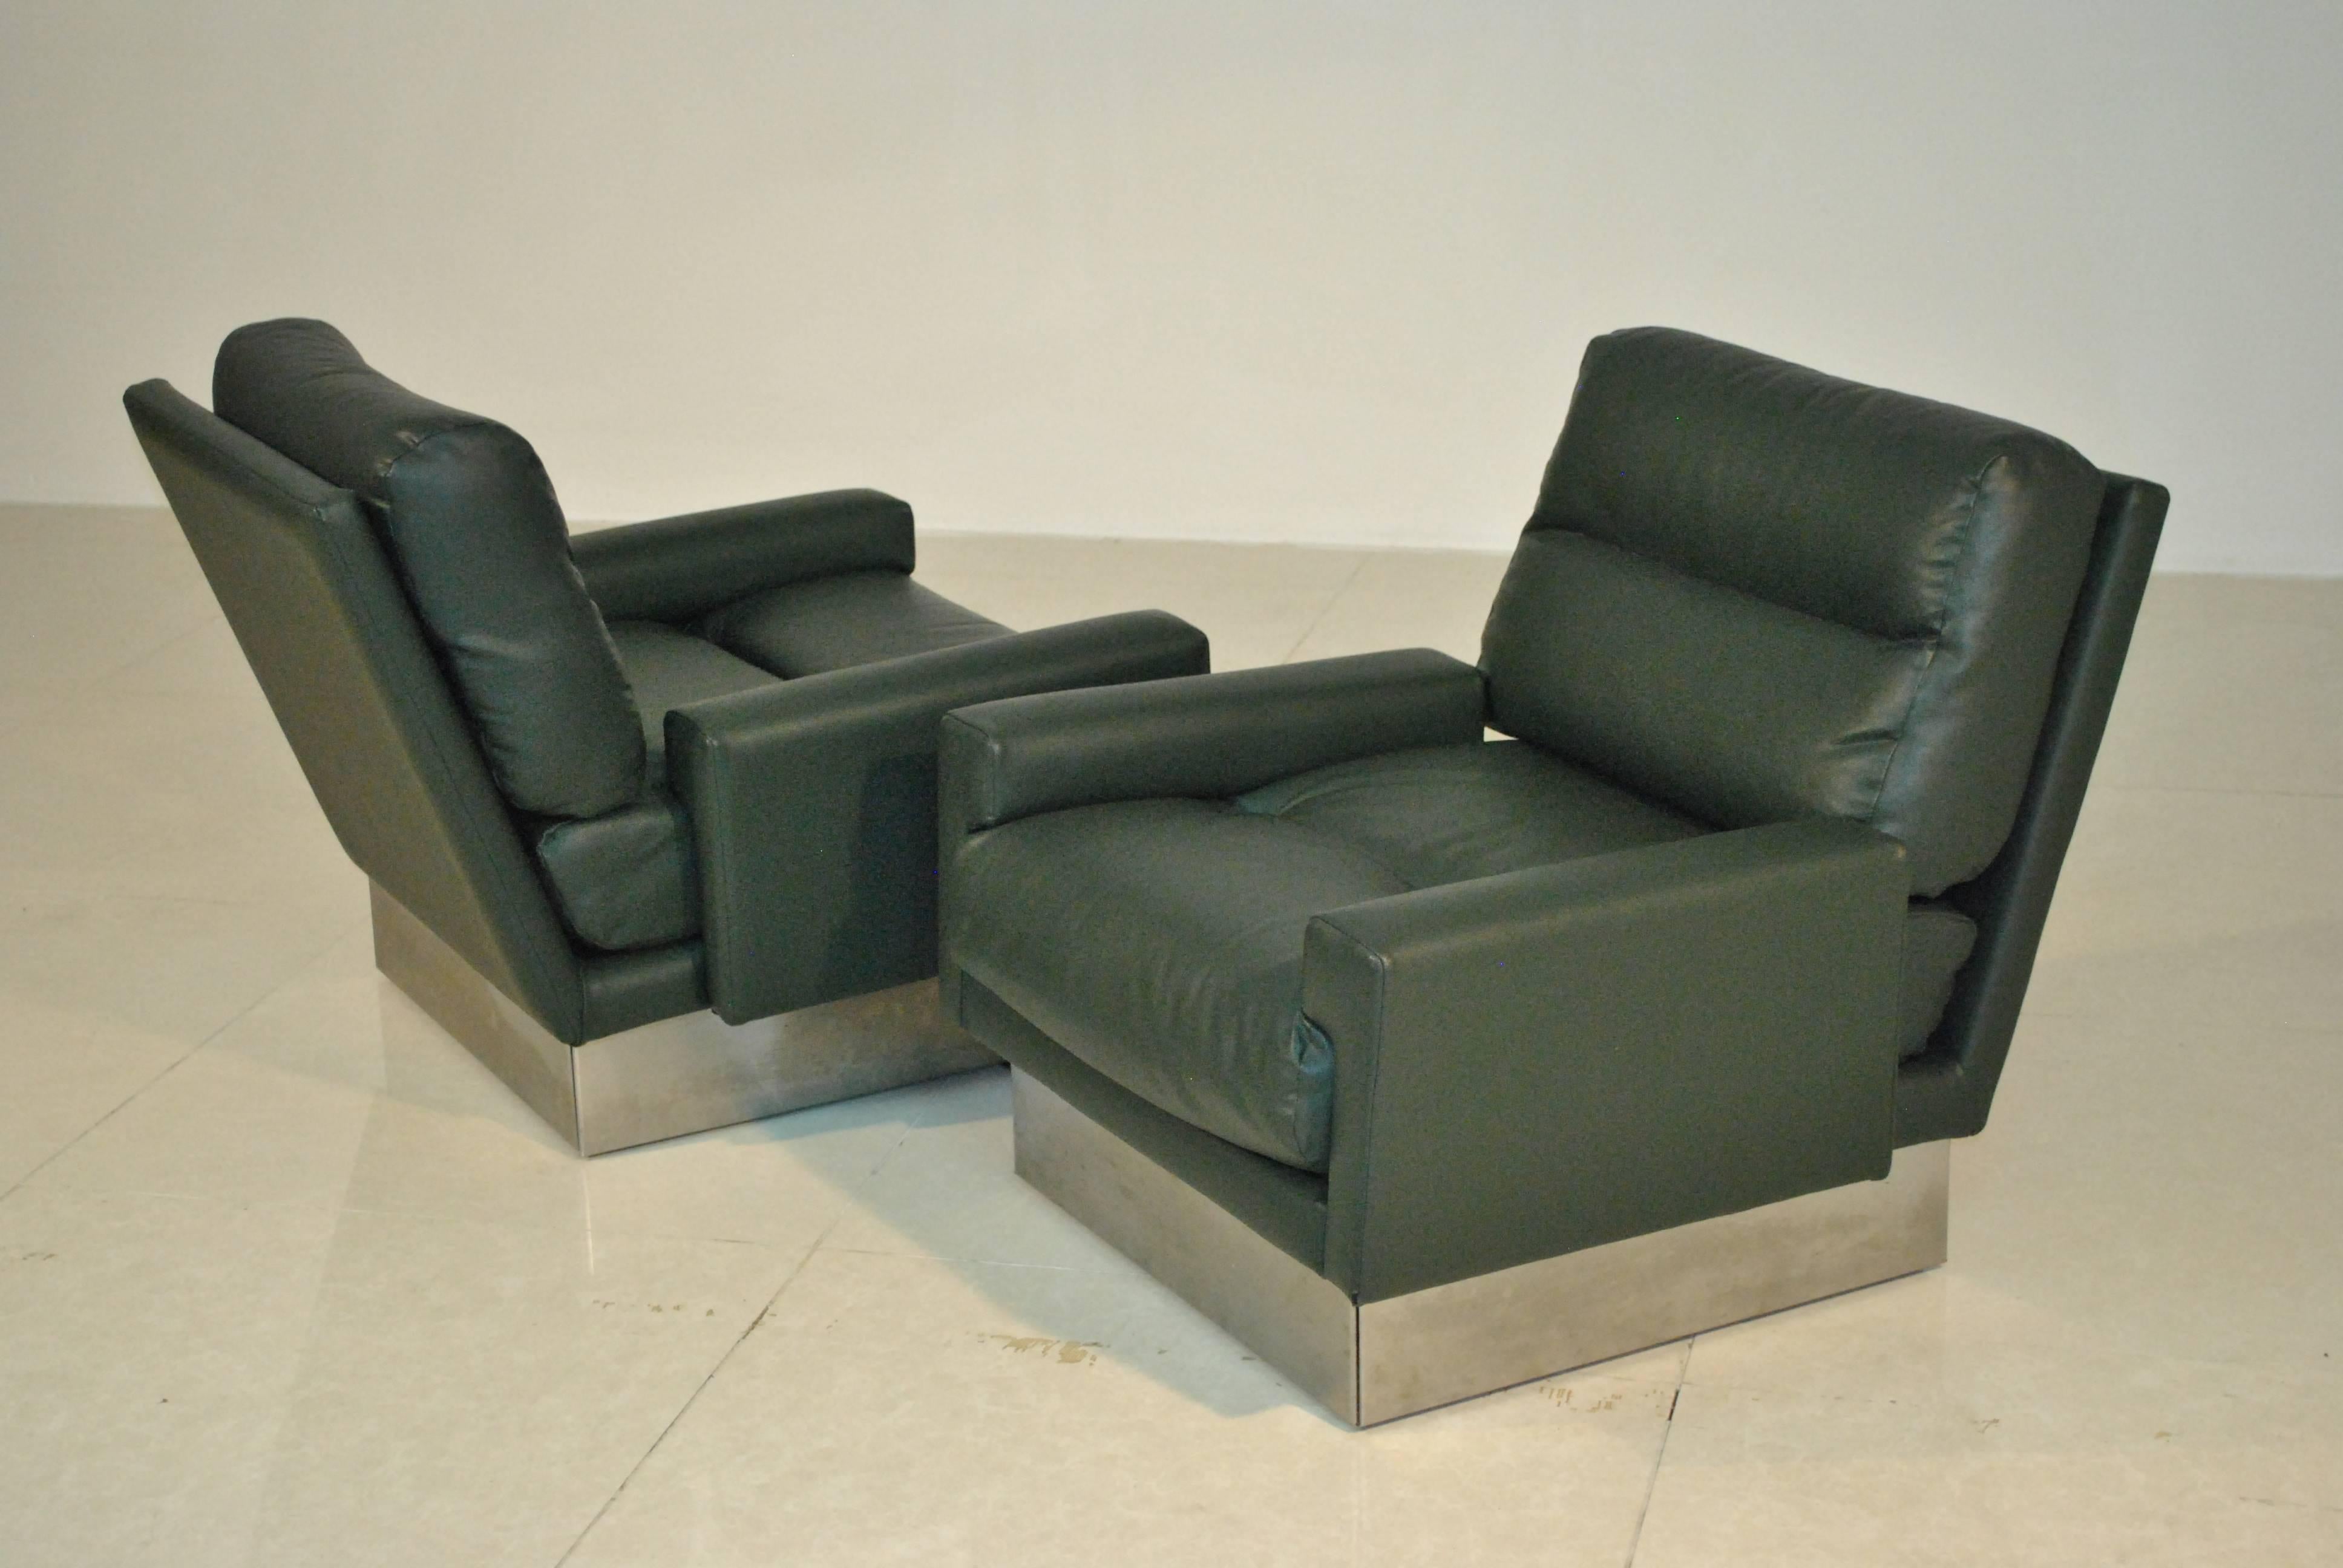 Very rare dark green leather and steel armchairs by Jacques Charpentier. This model with loose cushions and armrests is nearly unfindable, France, 1970s.

We have two matching three-seat sofas in our other listings (last picture).
Very good